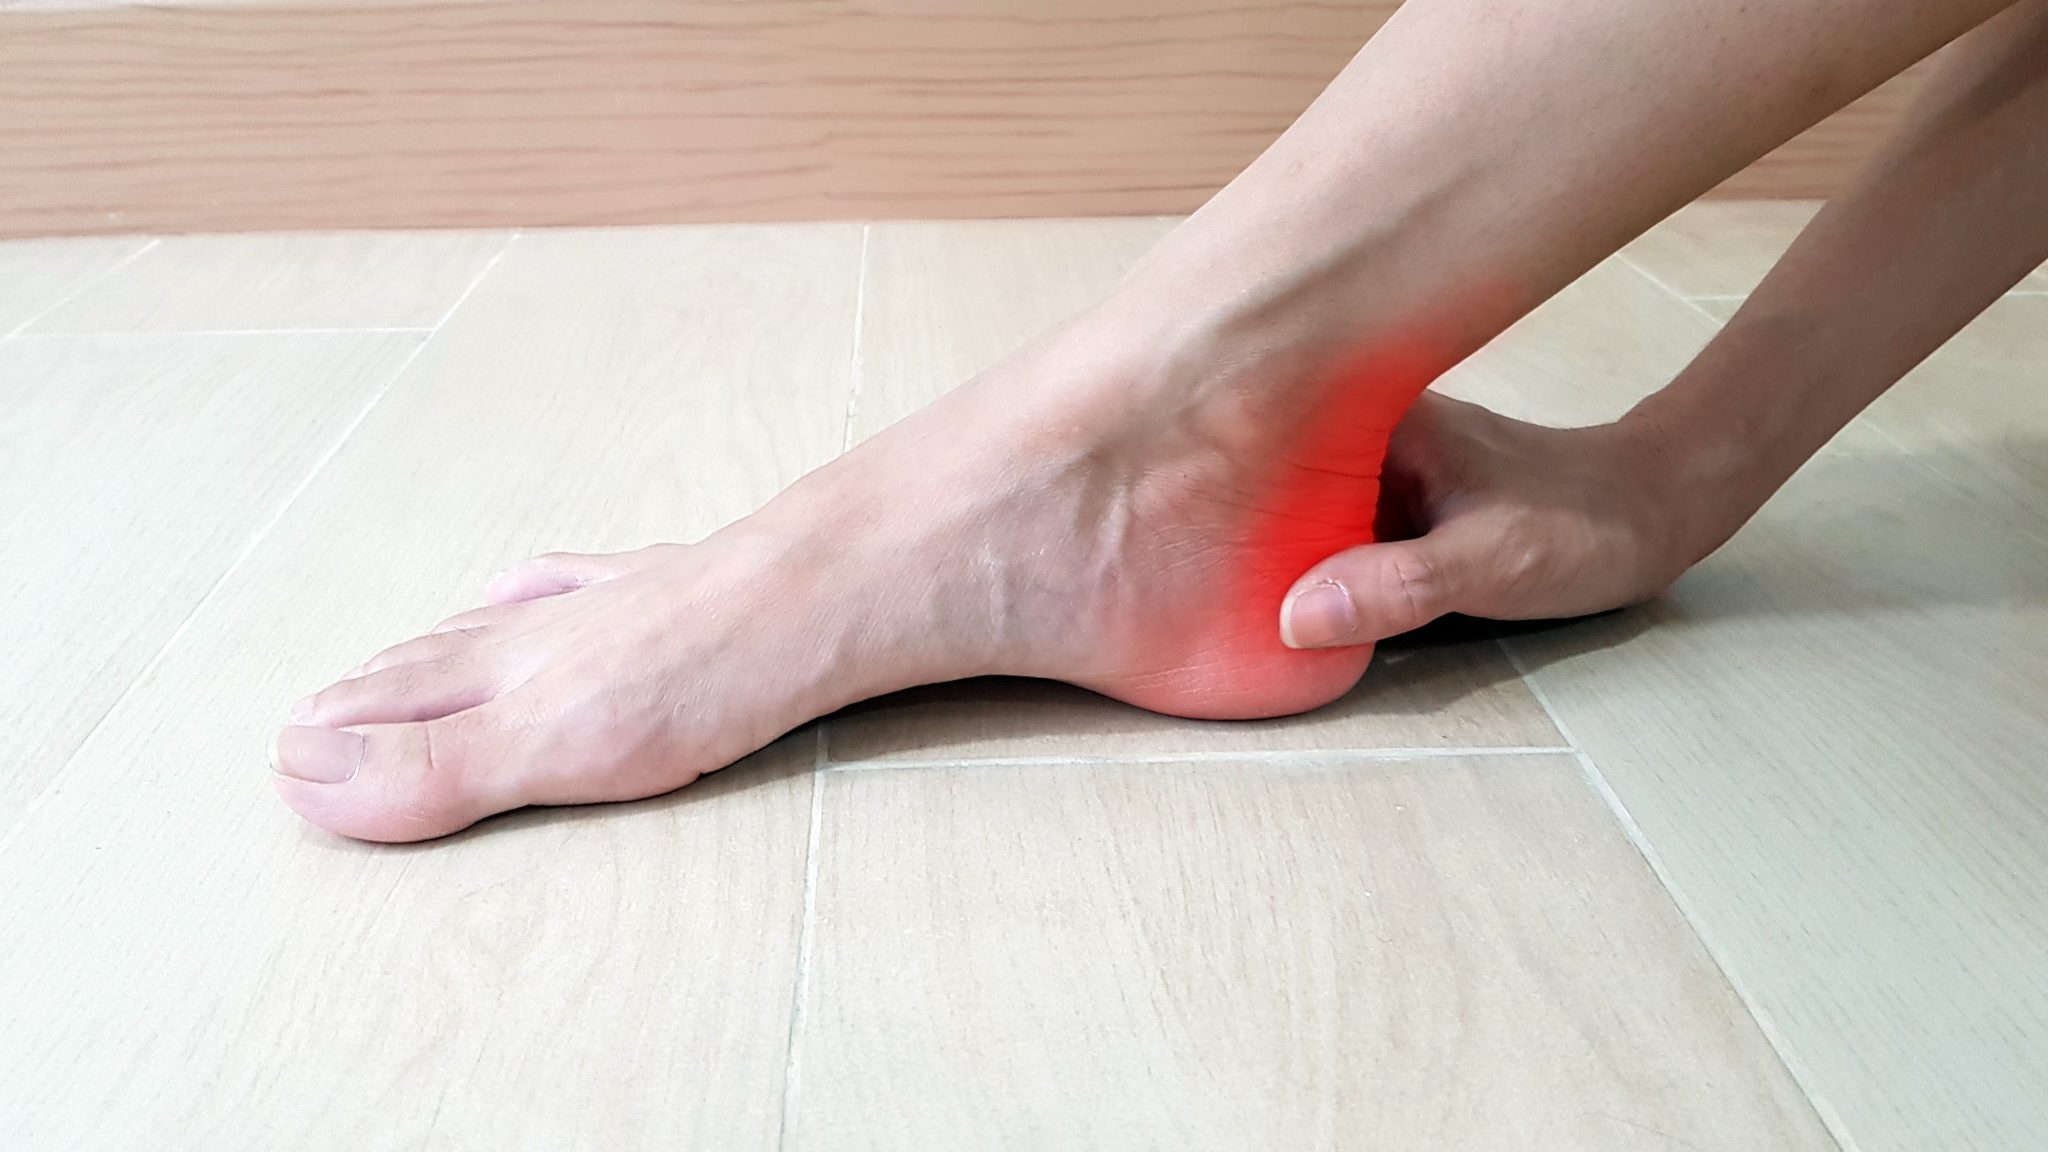 Shockwave Therapy Relieves Heel Spur Pain